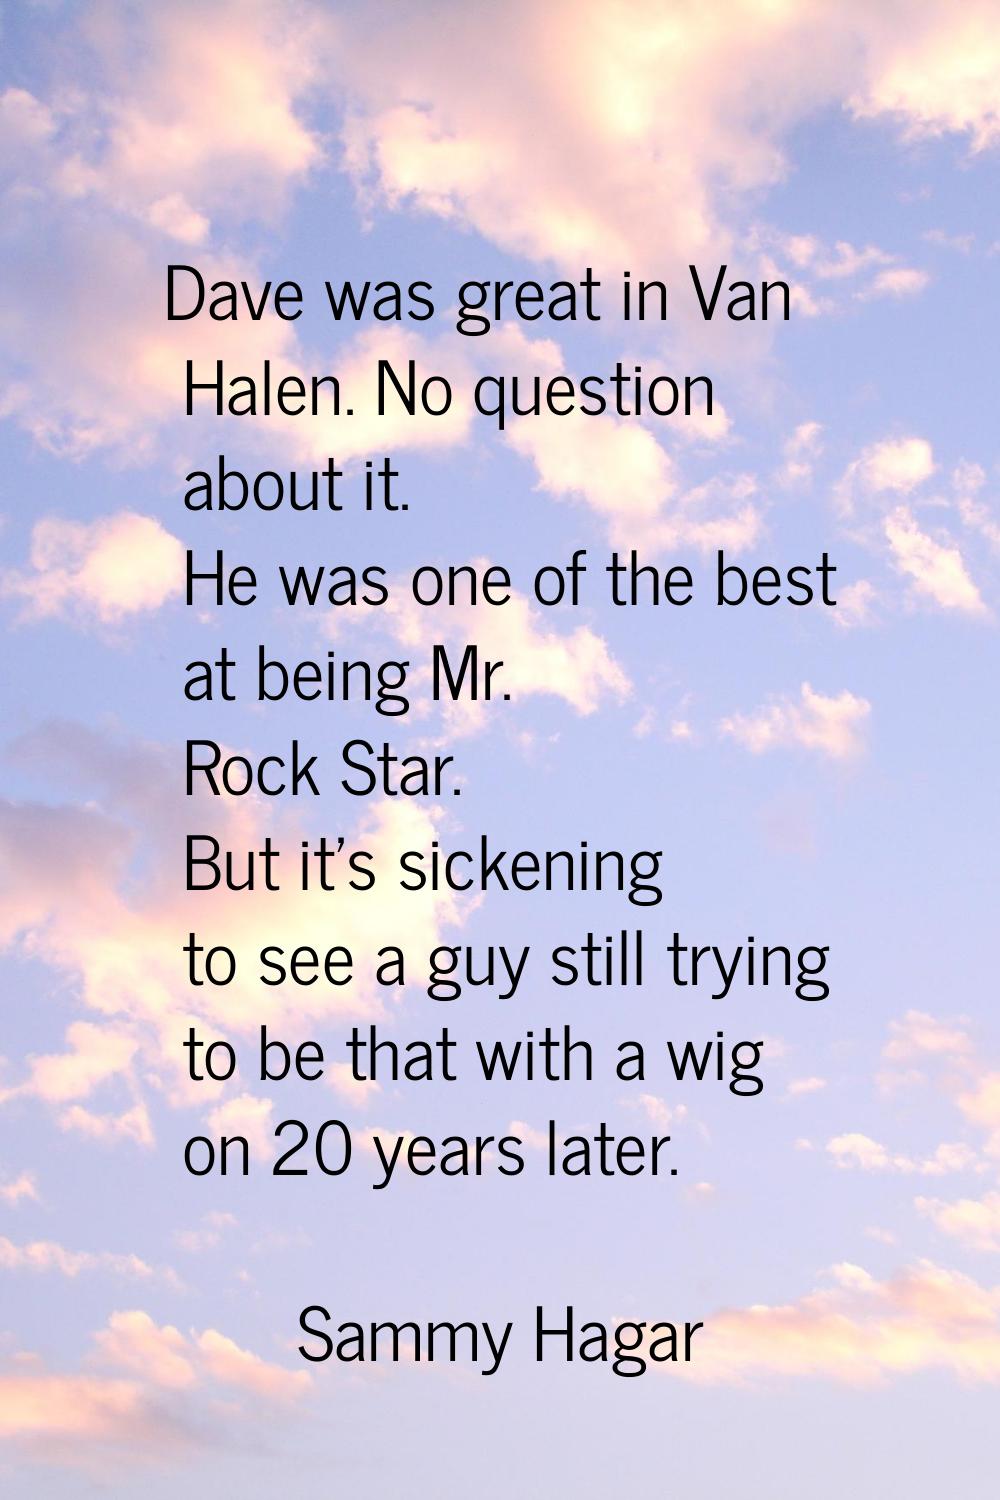 Dave was great in Van Halen. No question about it. He was one of the best at being Mr. Rock Star. B